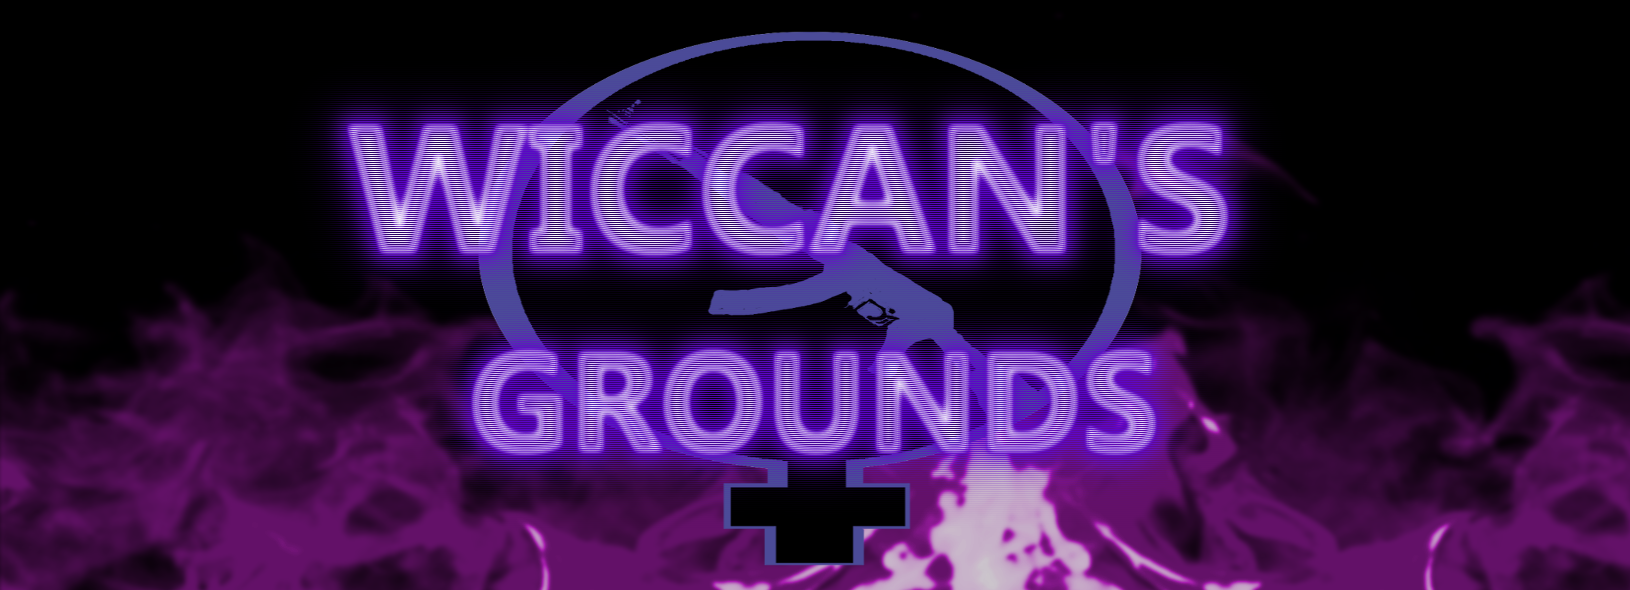 Wiccan's Grounds